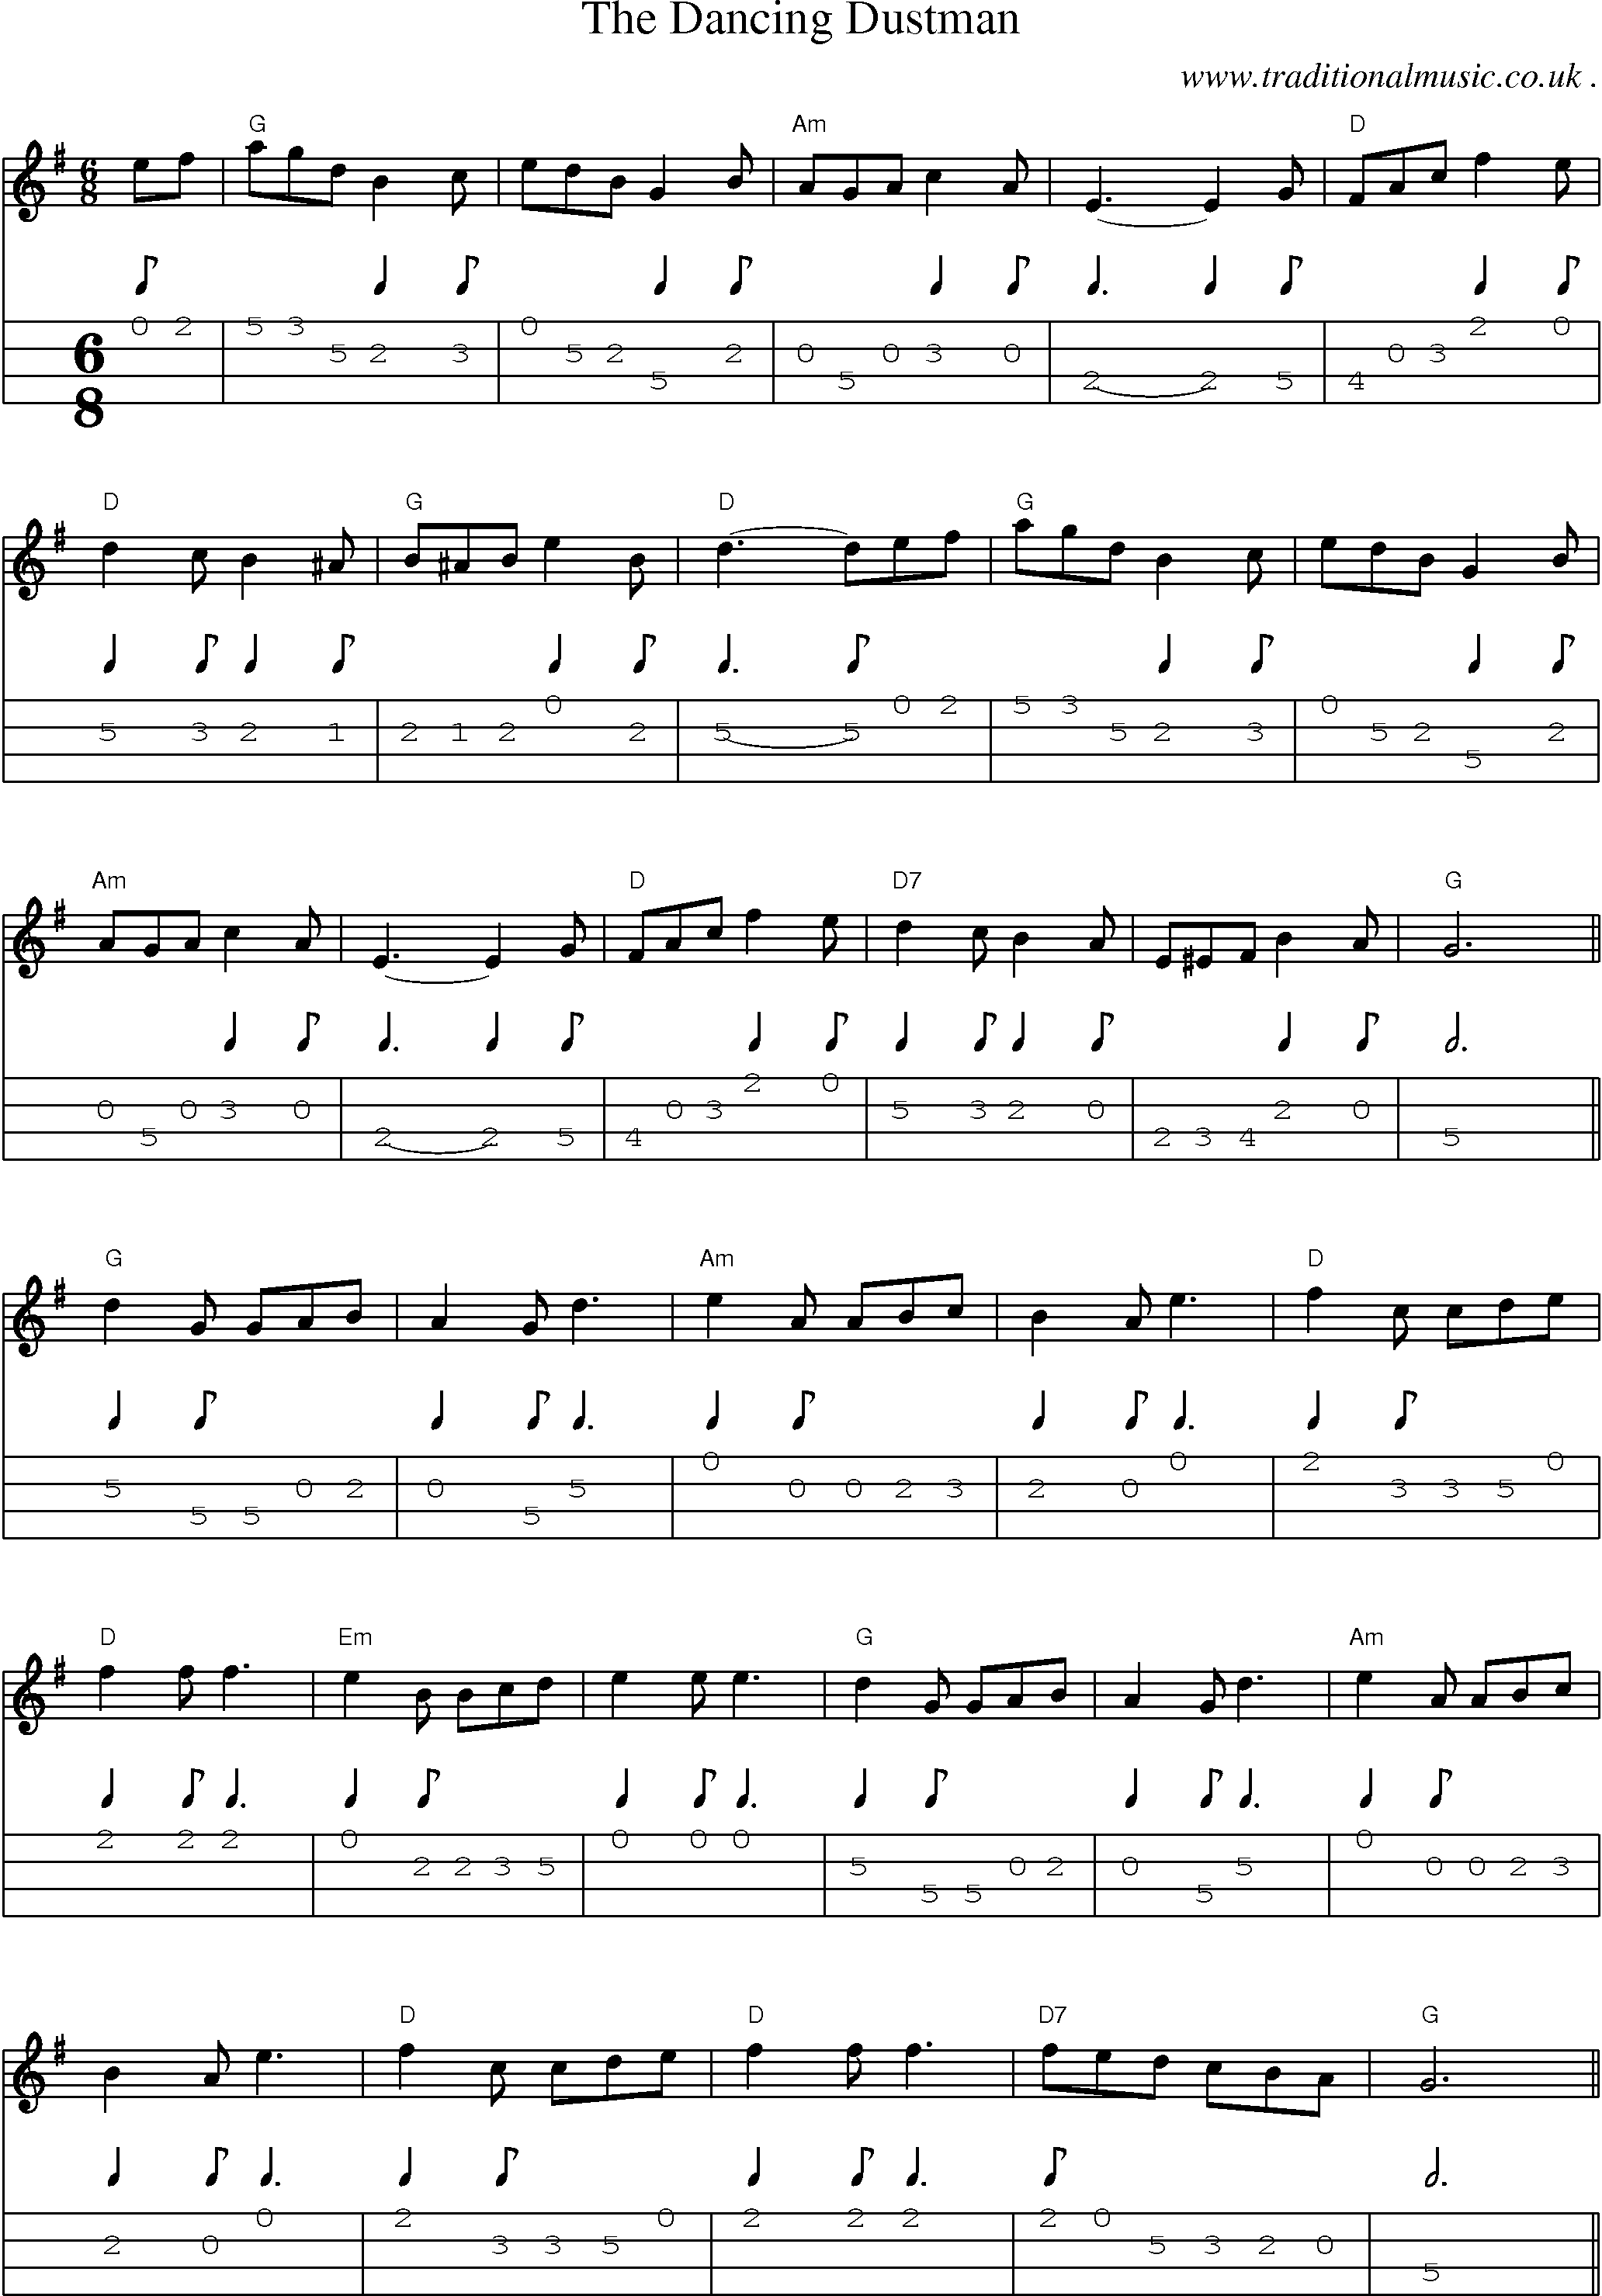 Sheet-Music and Mandolin Tabs for The Dancing Dustman